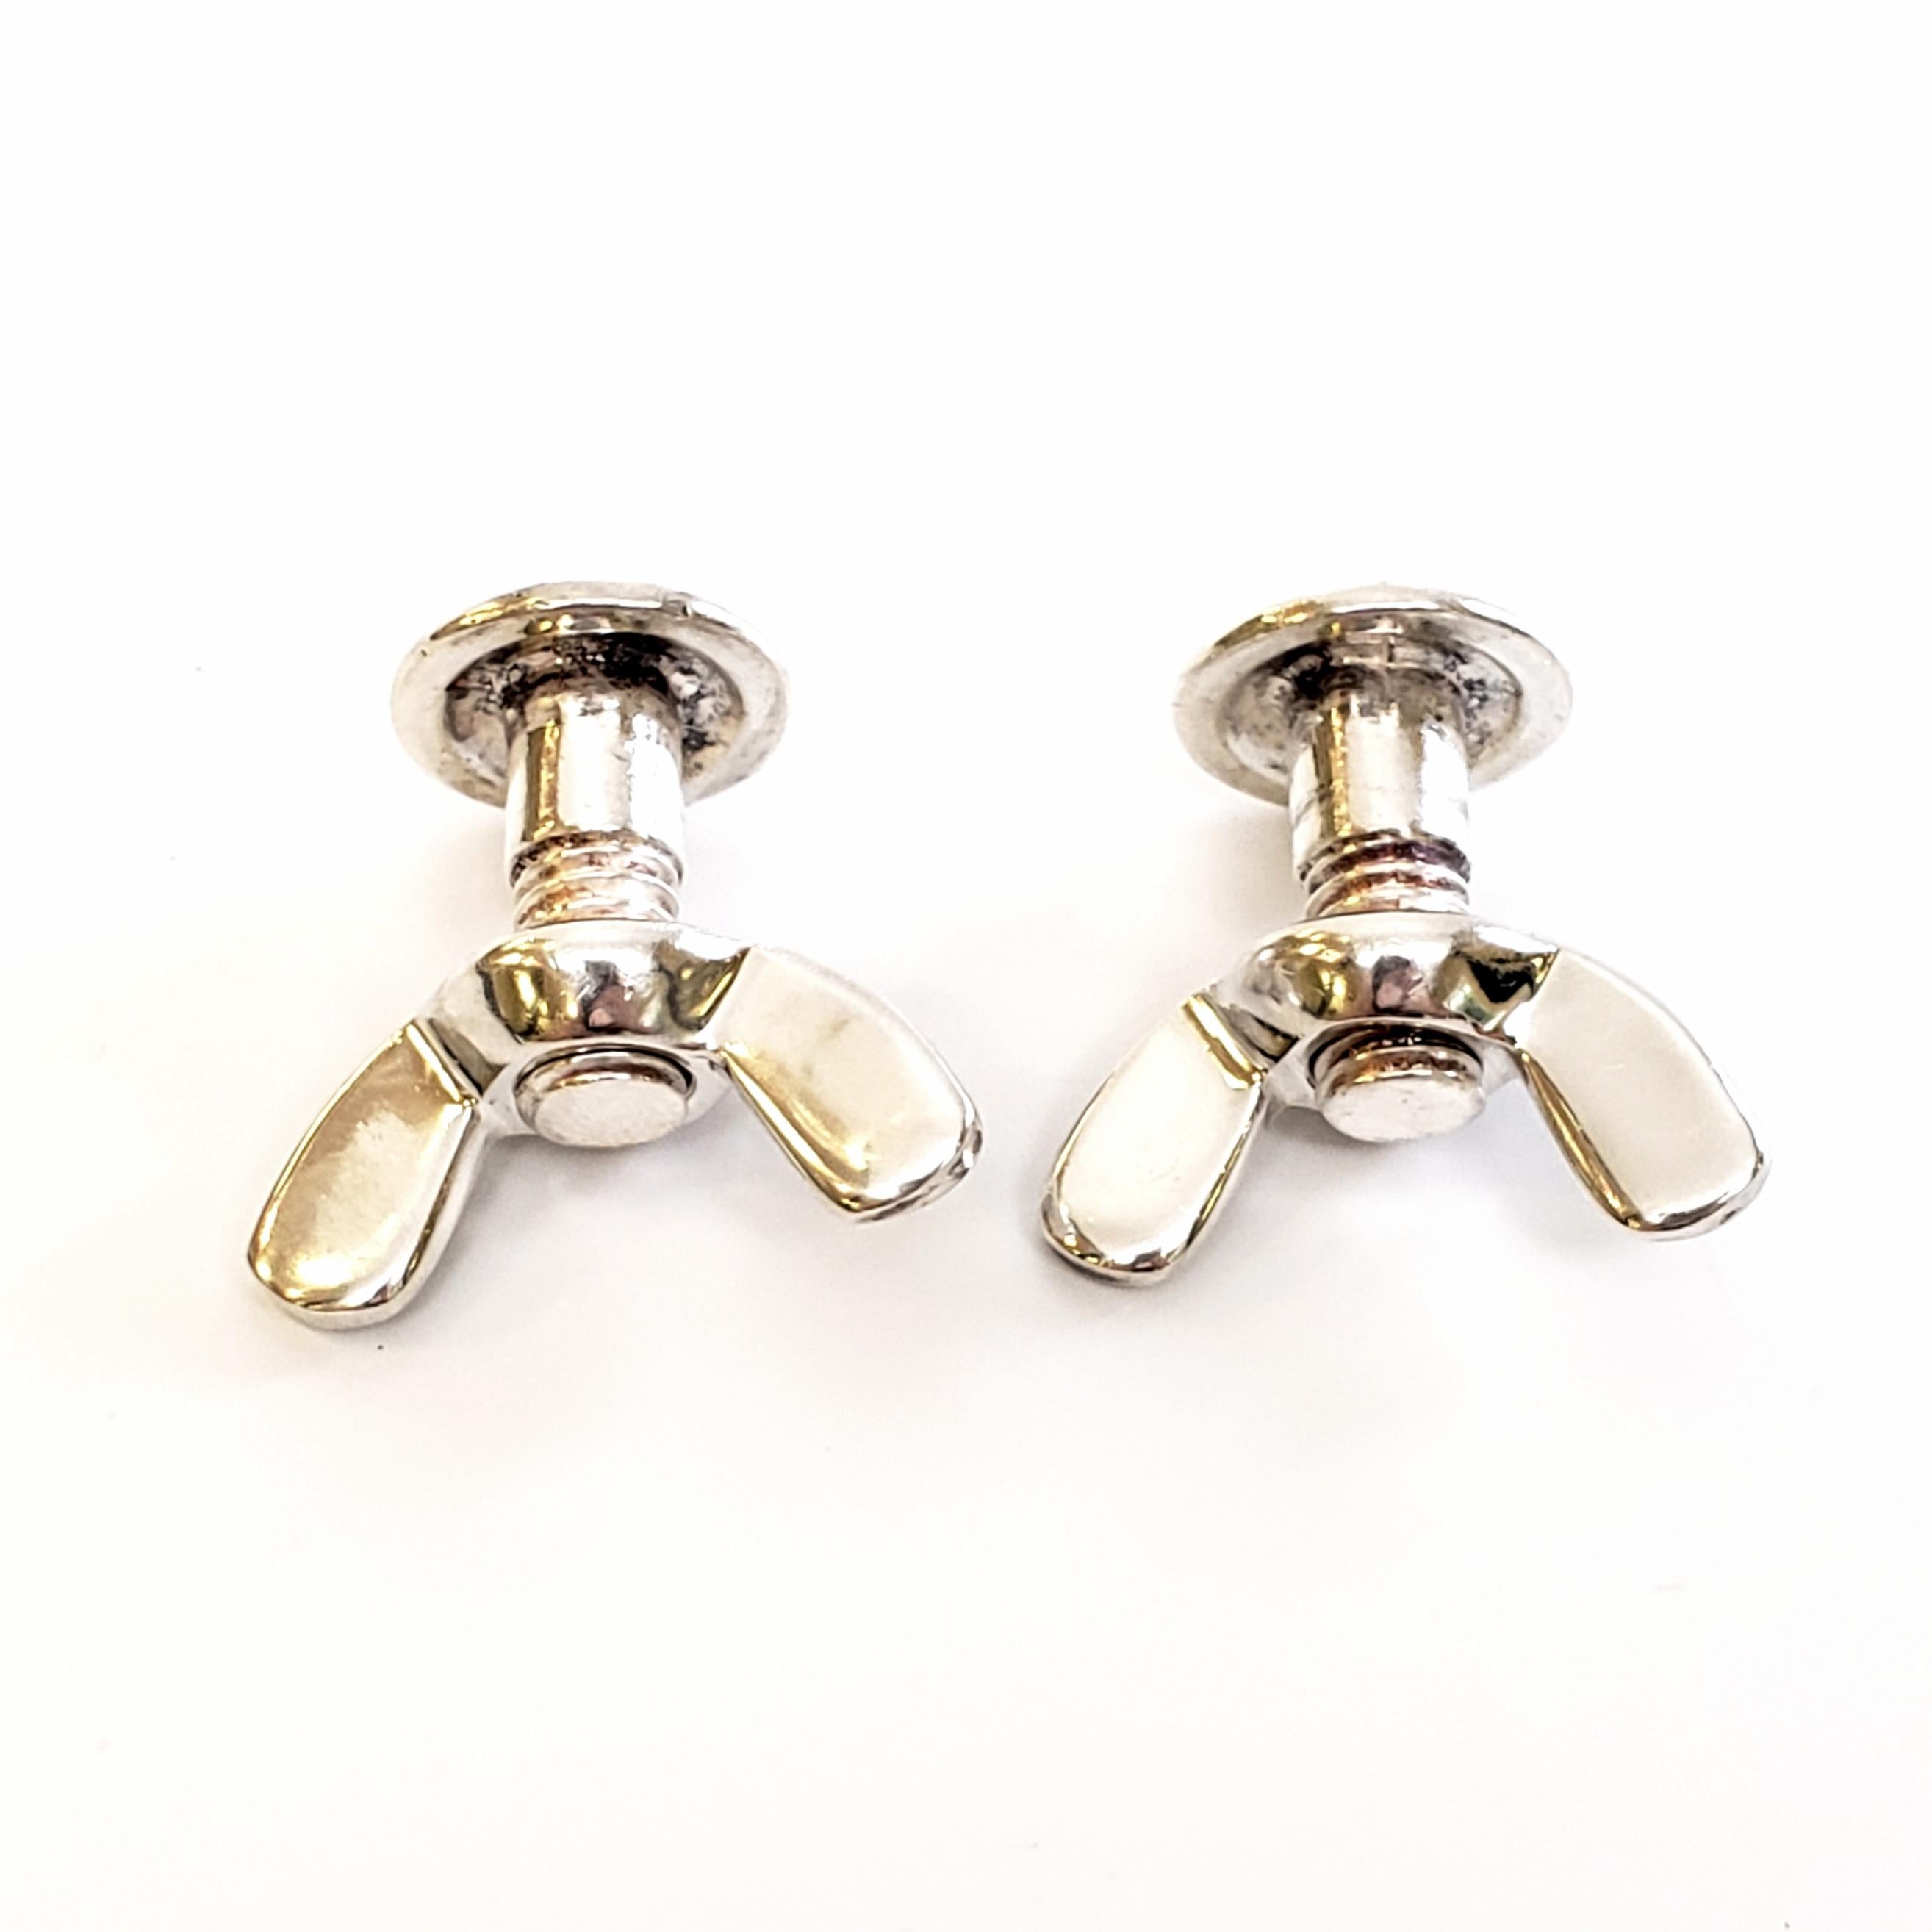 English Sterling Silver Wing Nut and Bolt Cufflinks 1